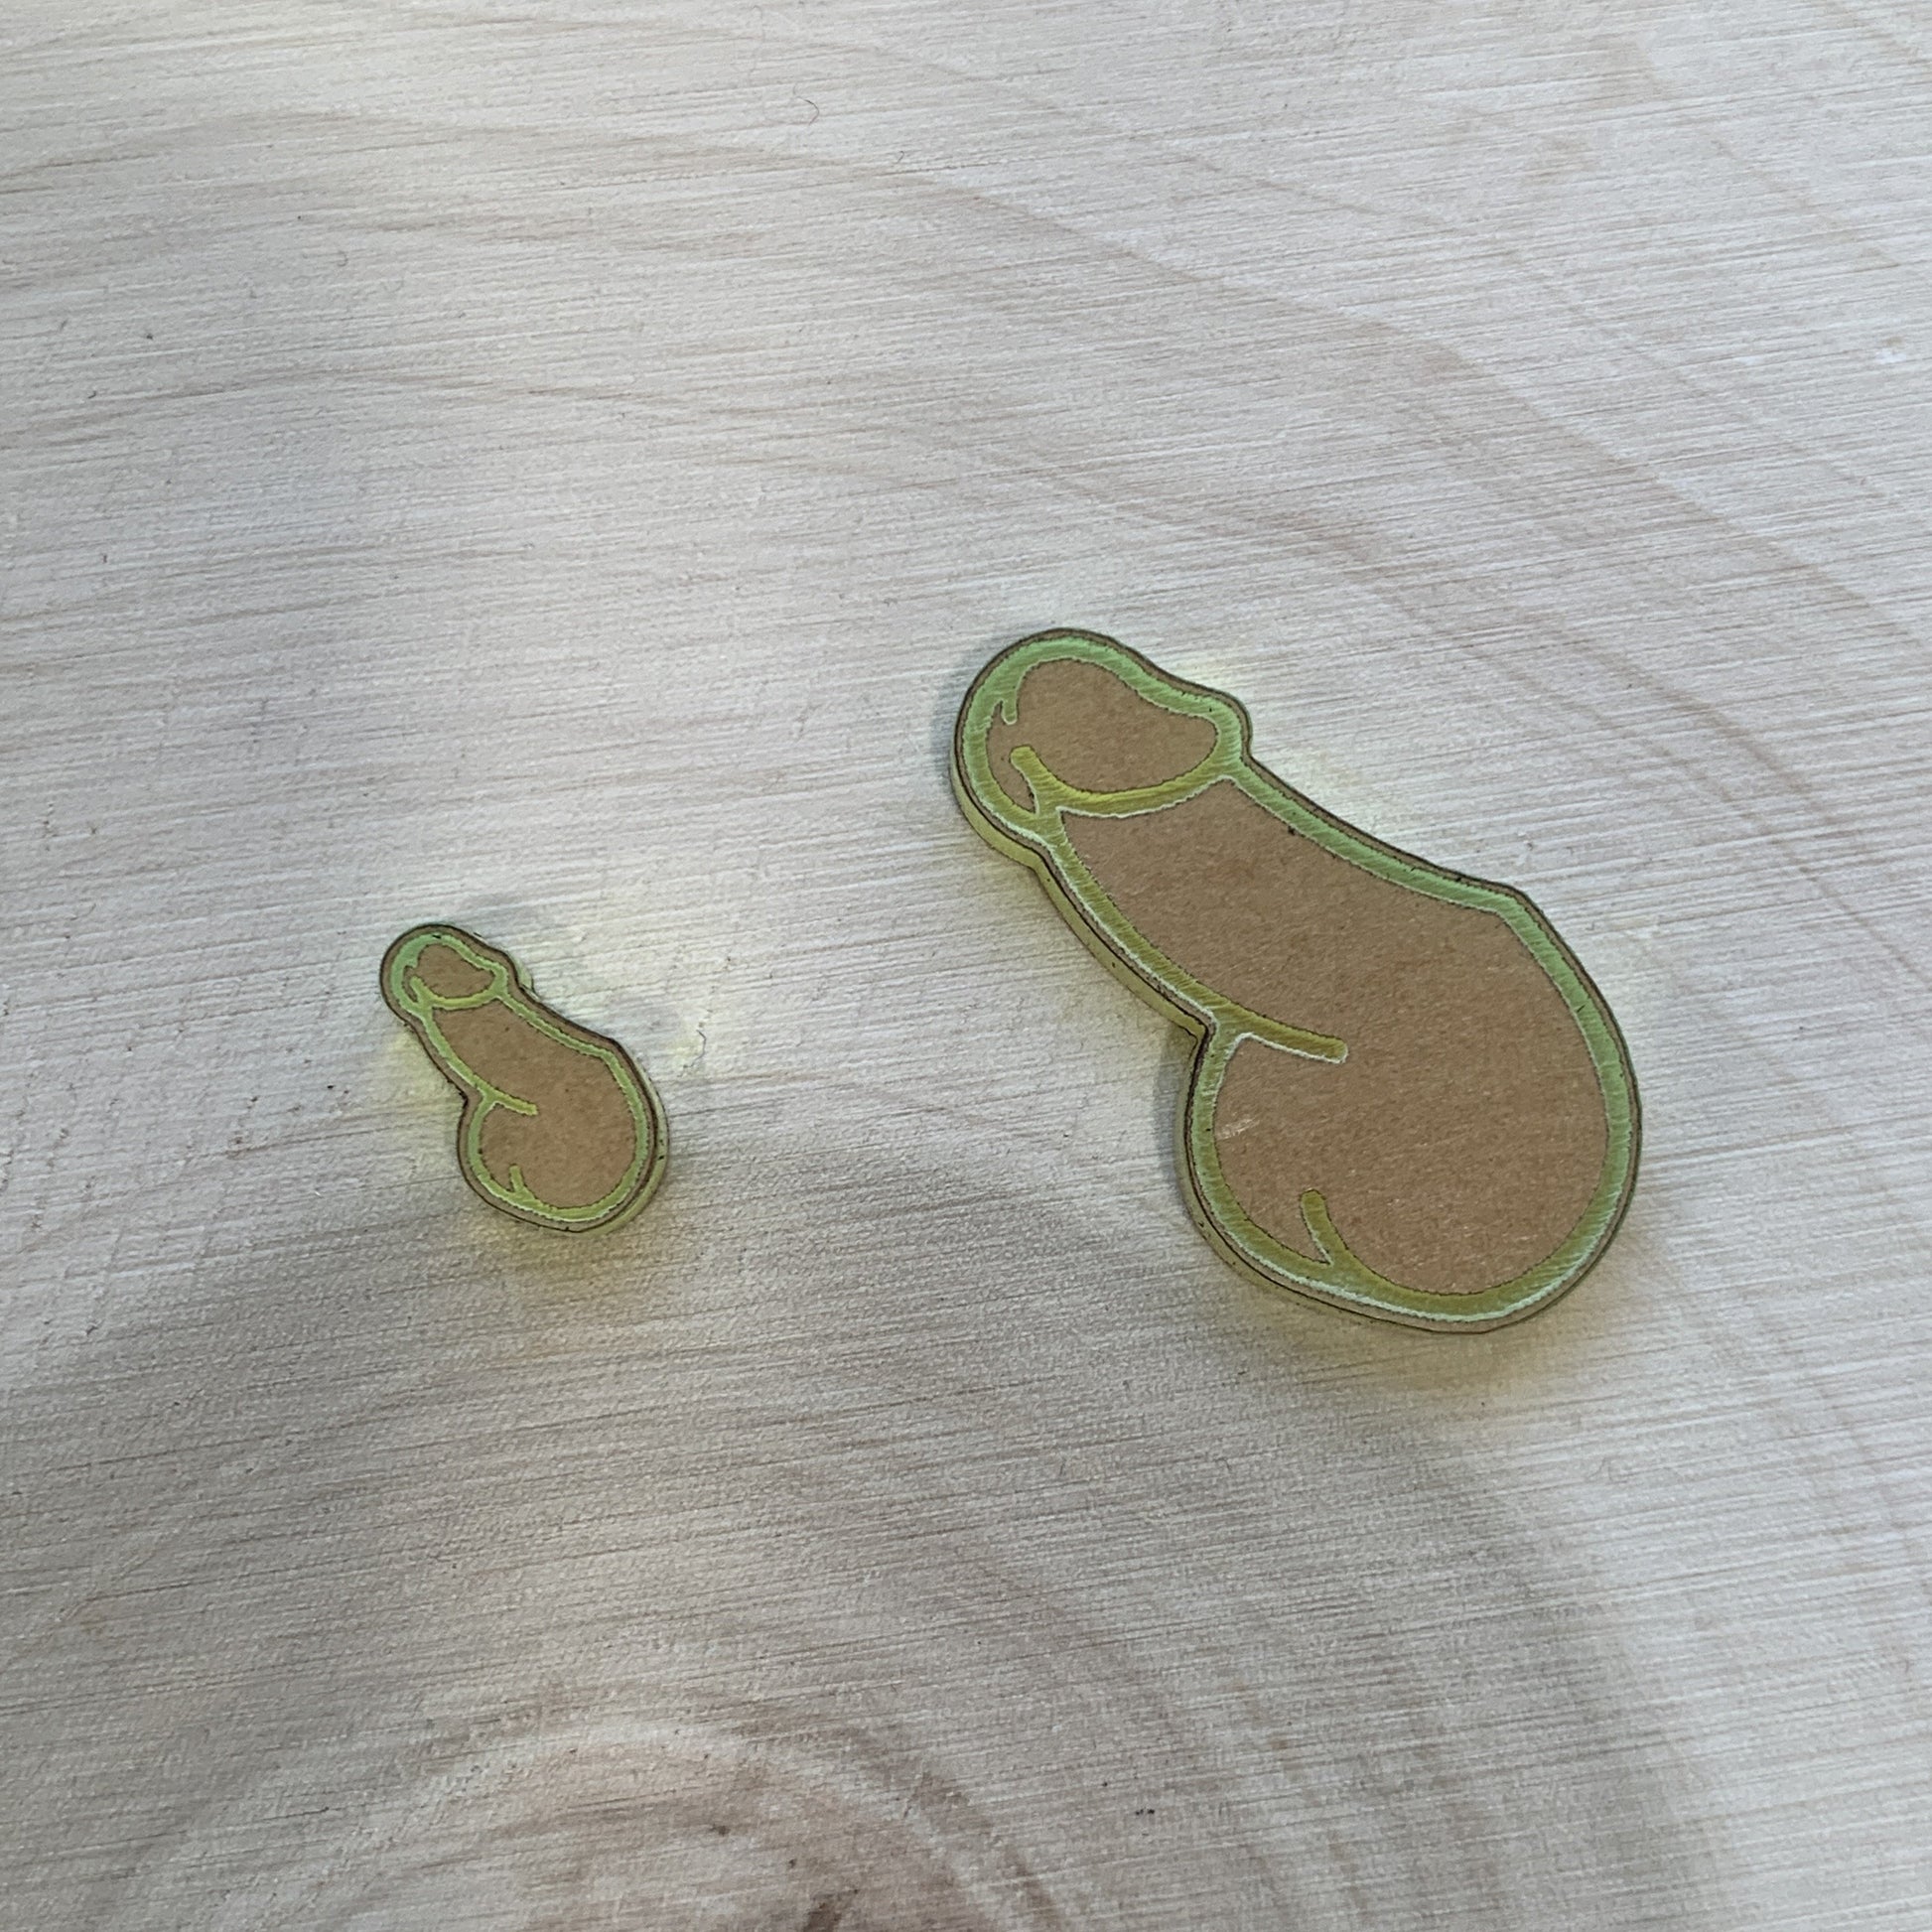 Penis Mold Silicone Mold